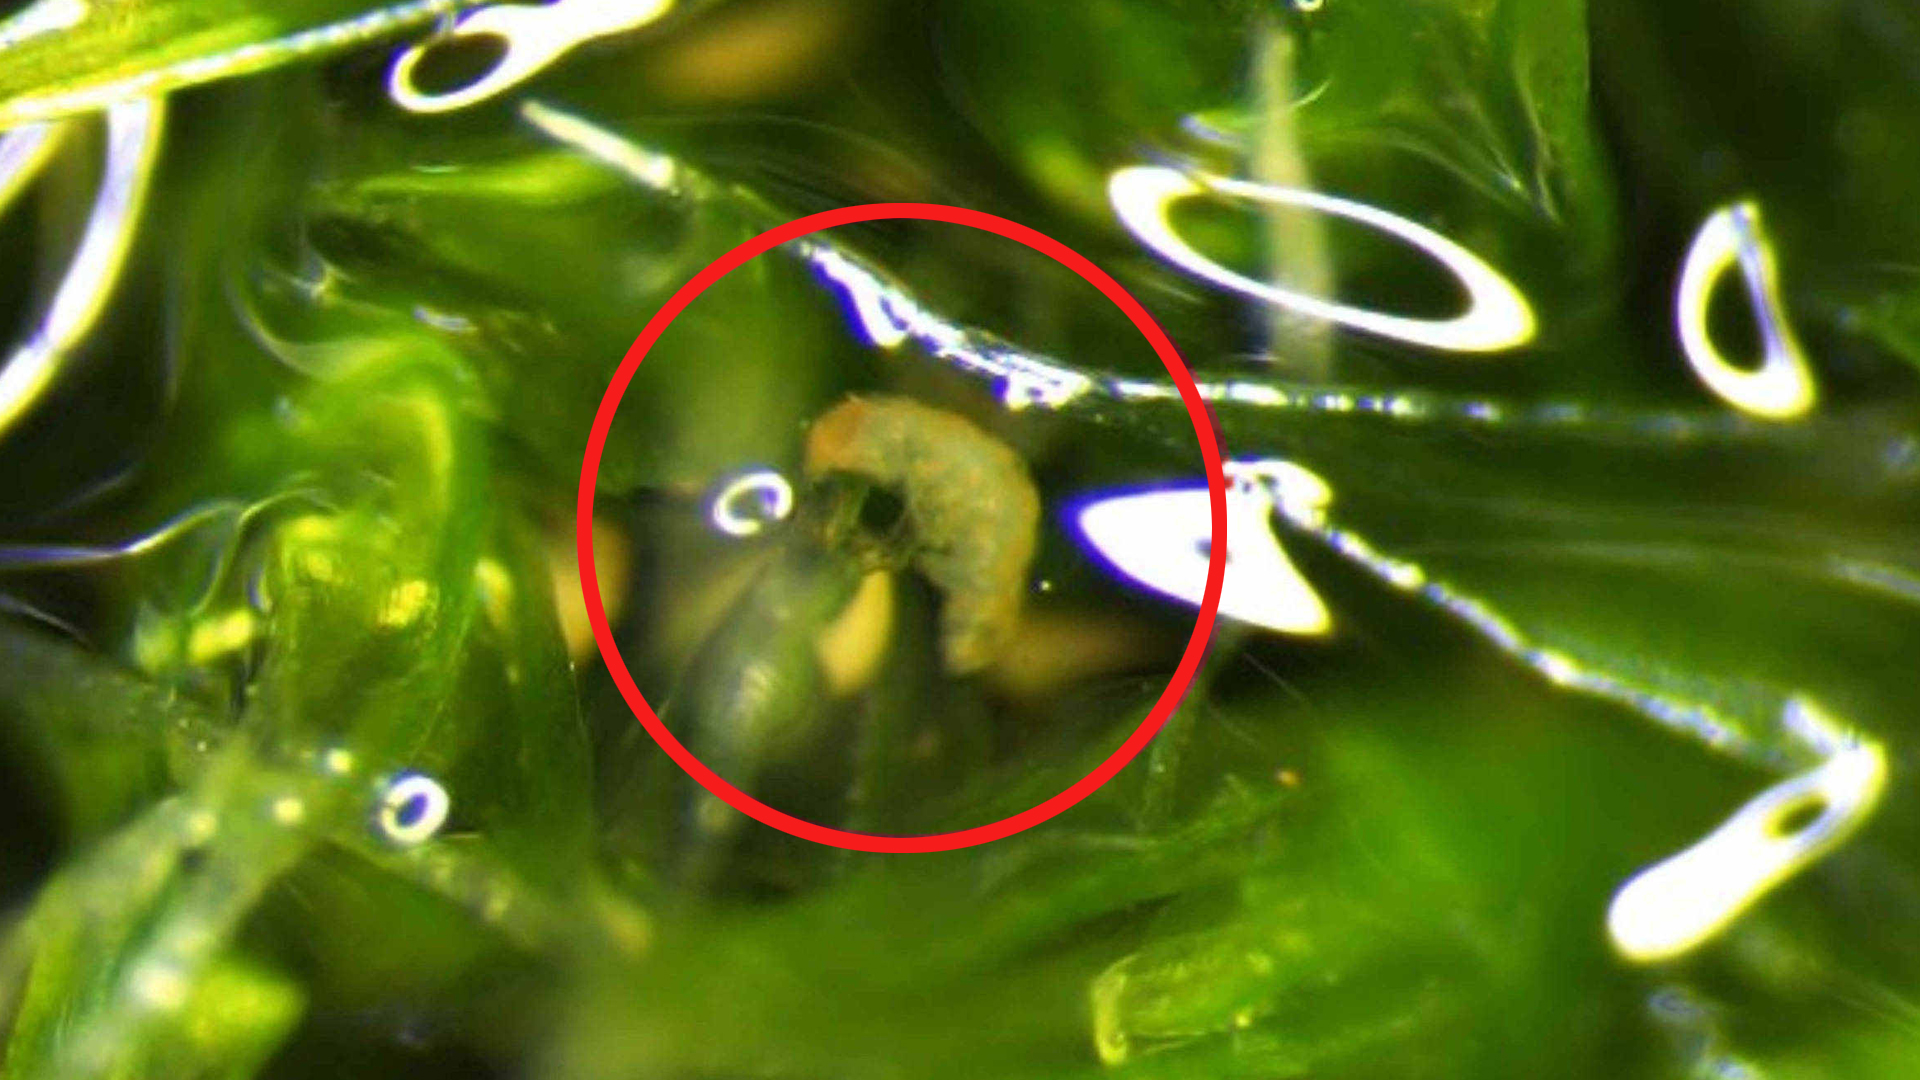 Milnesium inceptum that appeared during in vivo observation of rehydrated moss cushion (red circle).